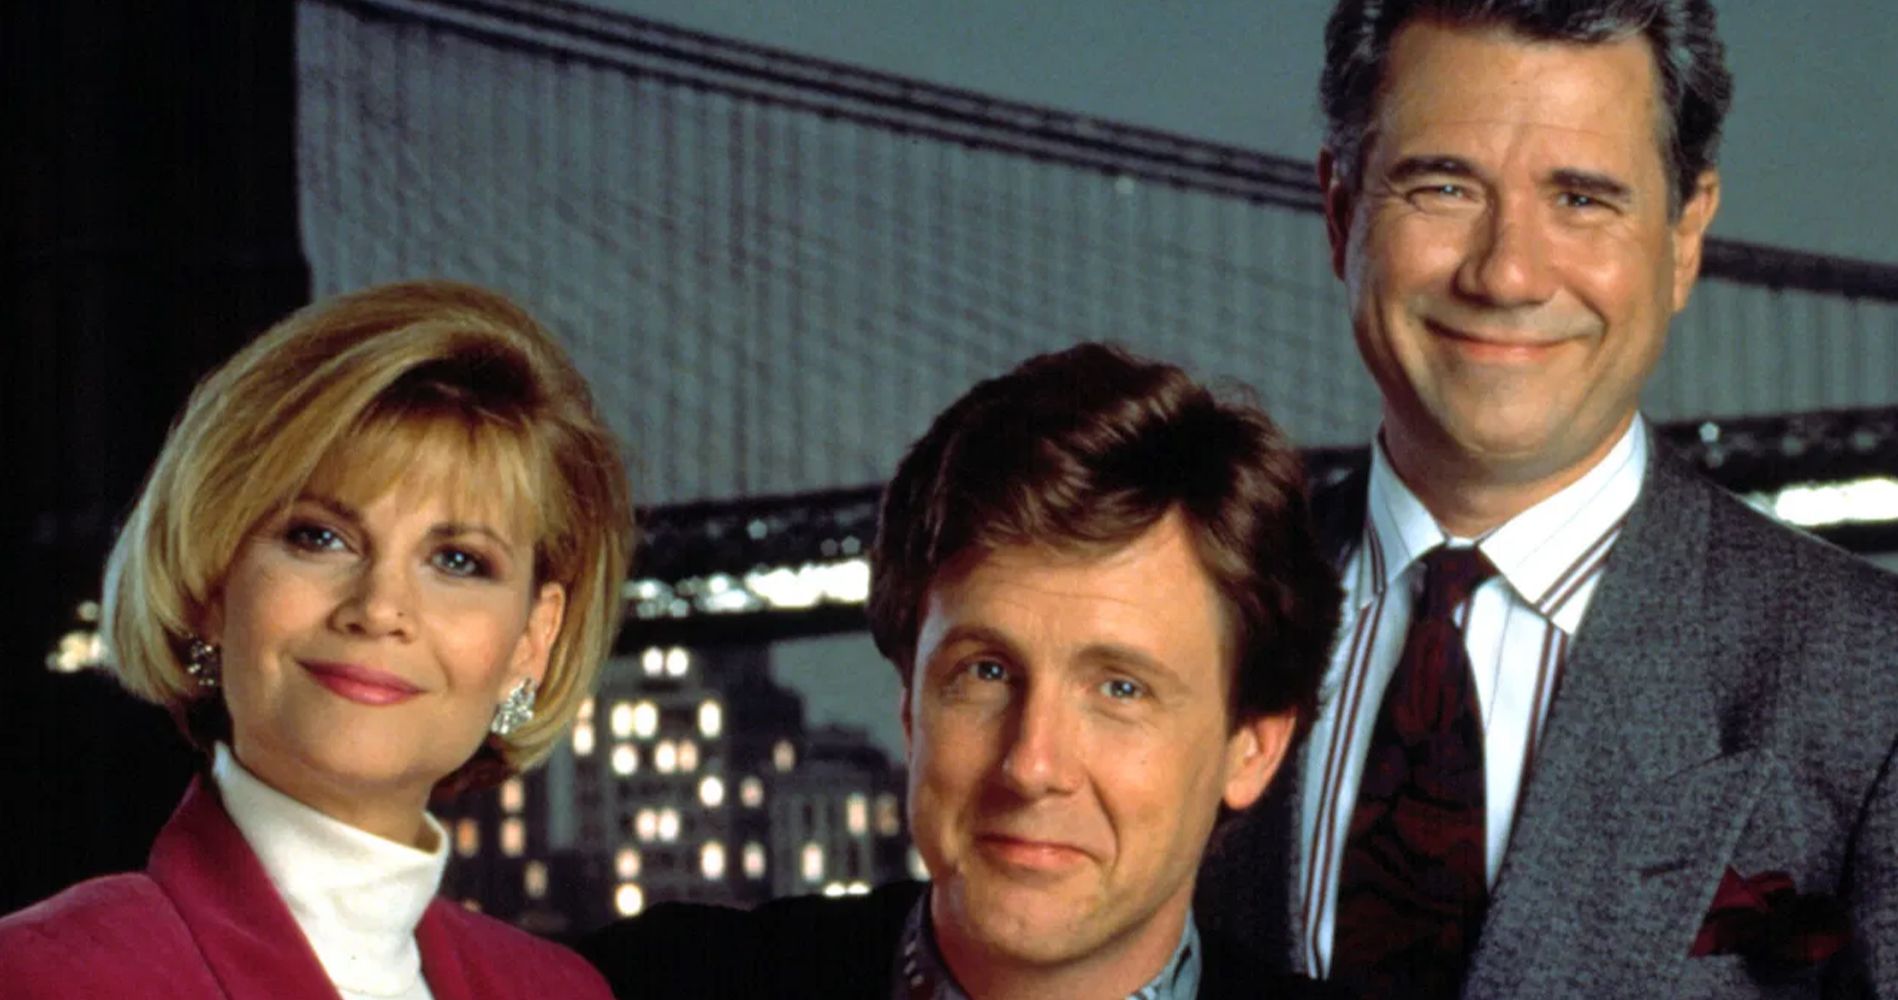 Night Court Reboot Gets Series Order at NBC, John Larroquette Confirmed to Return